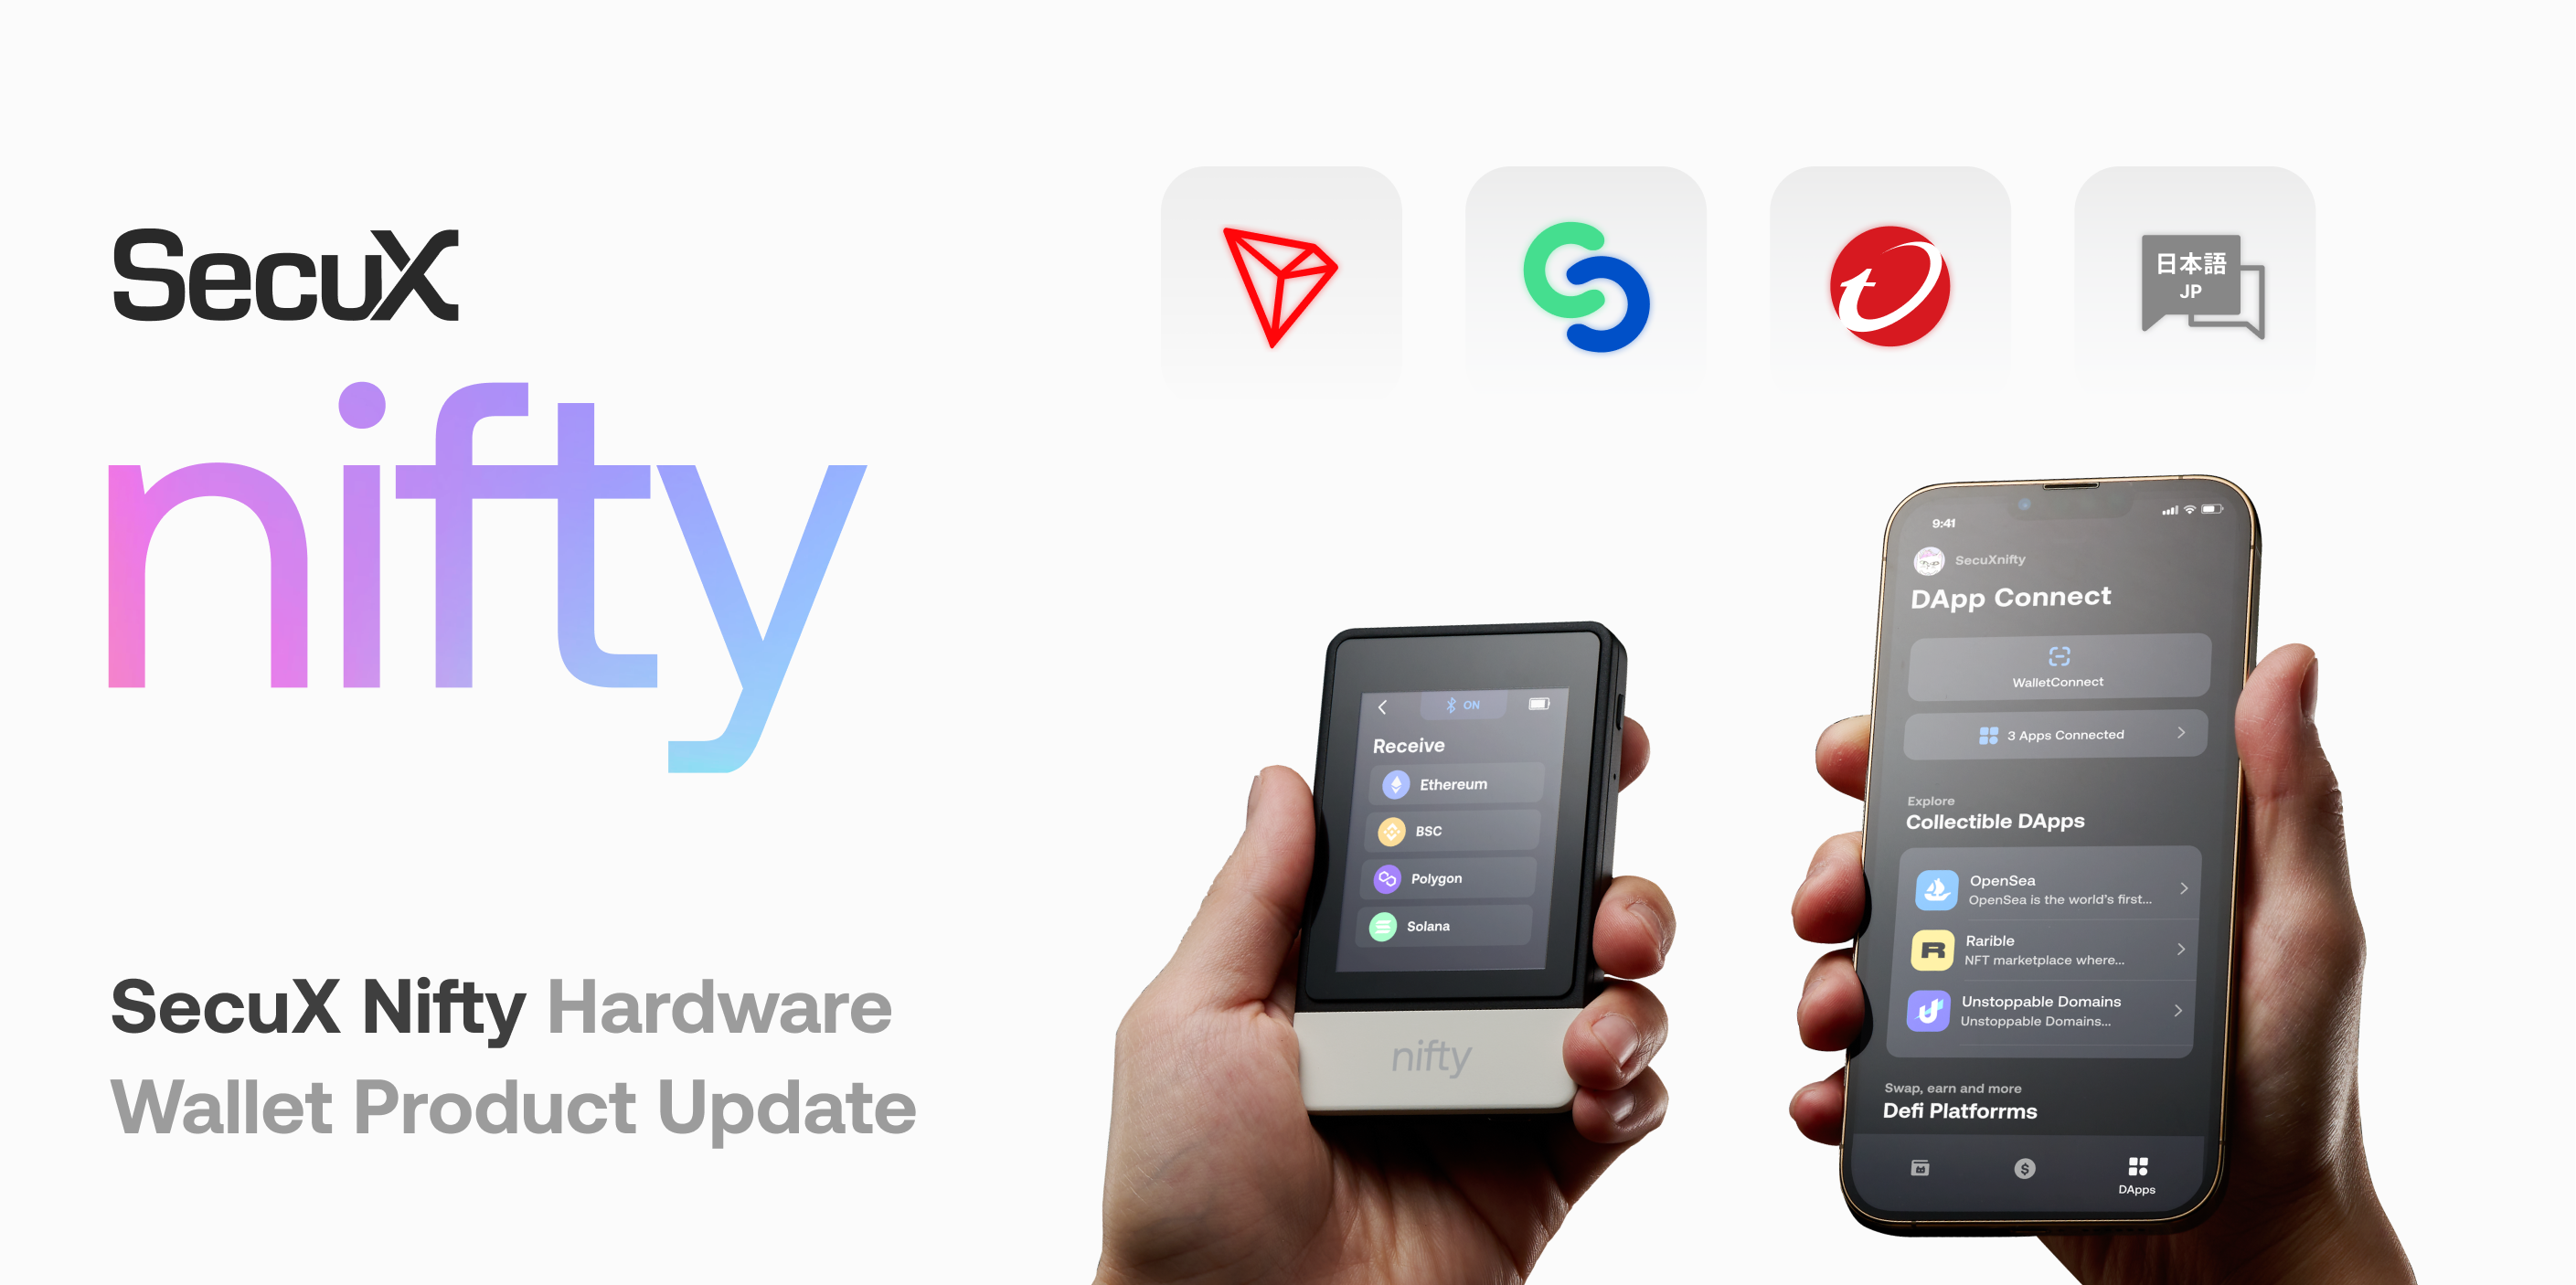 SecuX Nifty Hardware Wallet Product Update